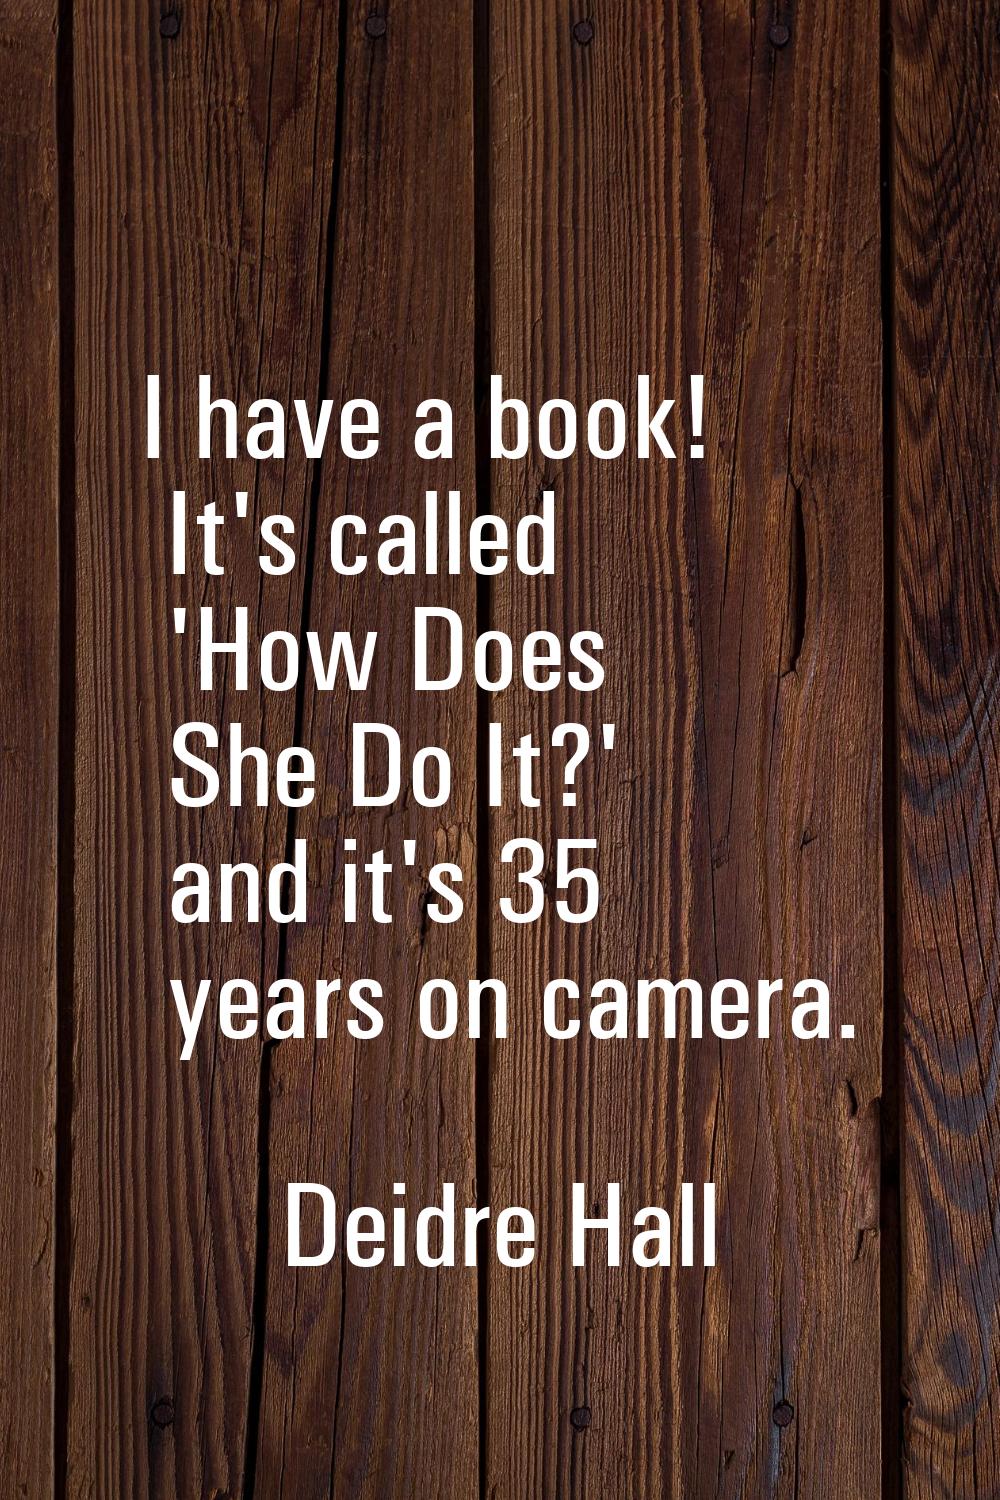 I have a book! It's called 'How Does She Do It?' and it's 35 years on camera.